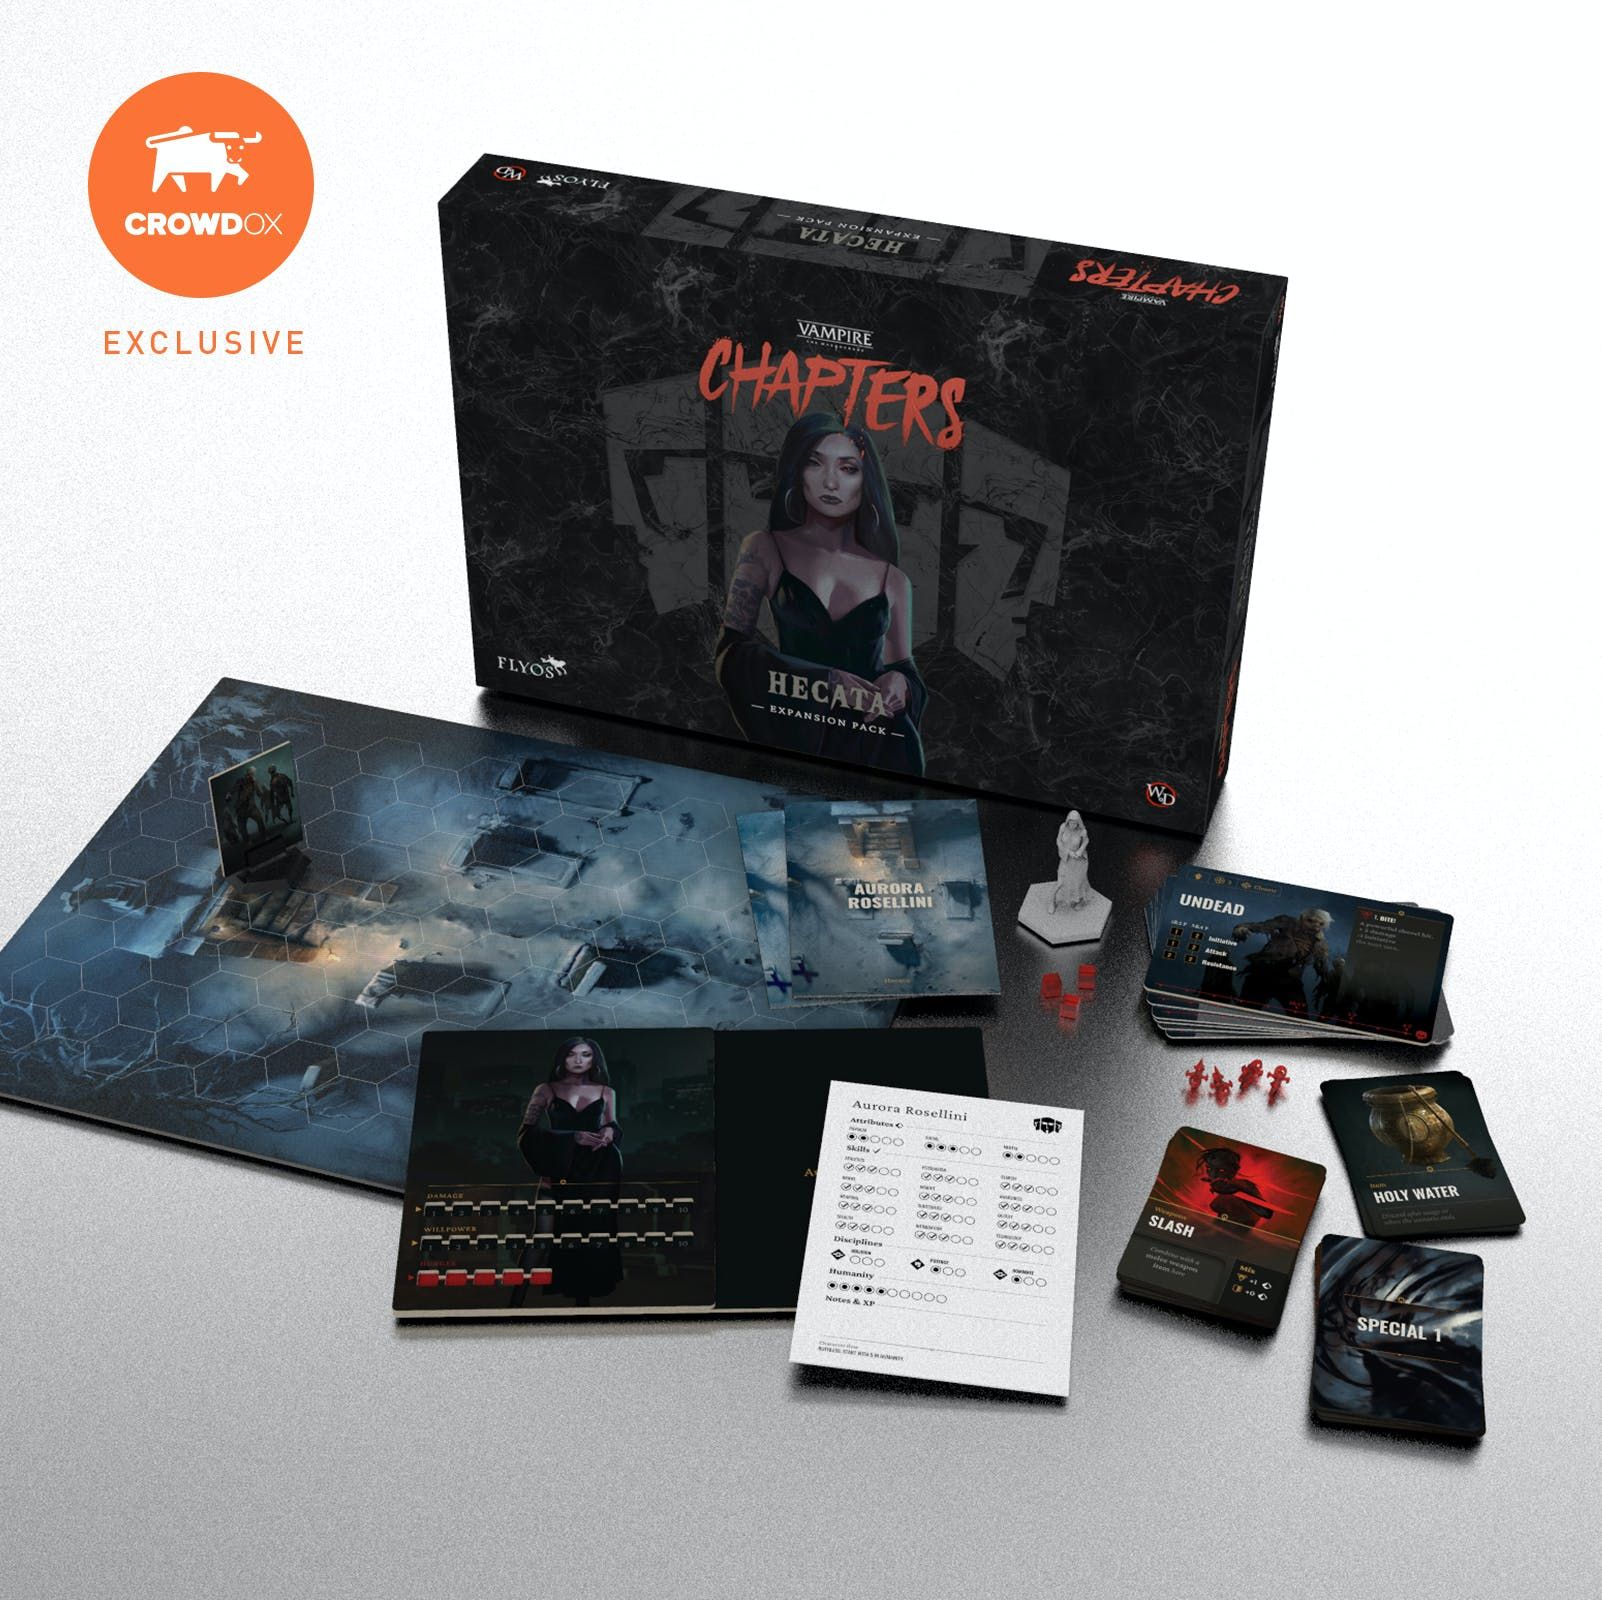 Flyos Games Vampire: The Masquerade – Chapters: Hecata Expansion